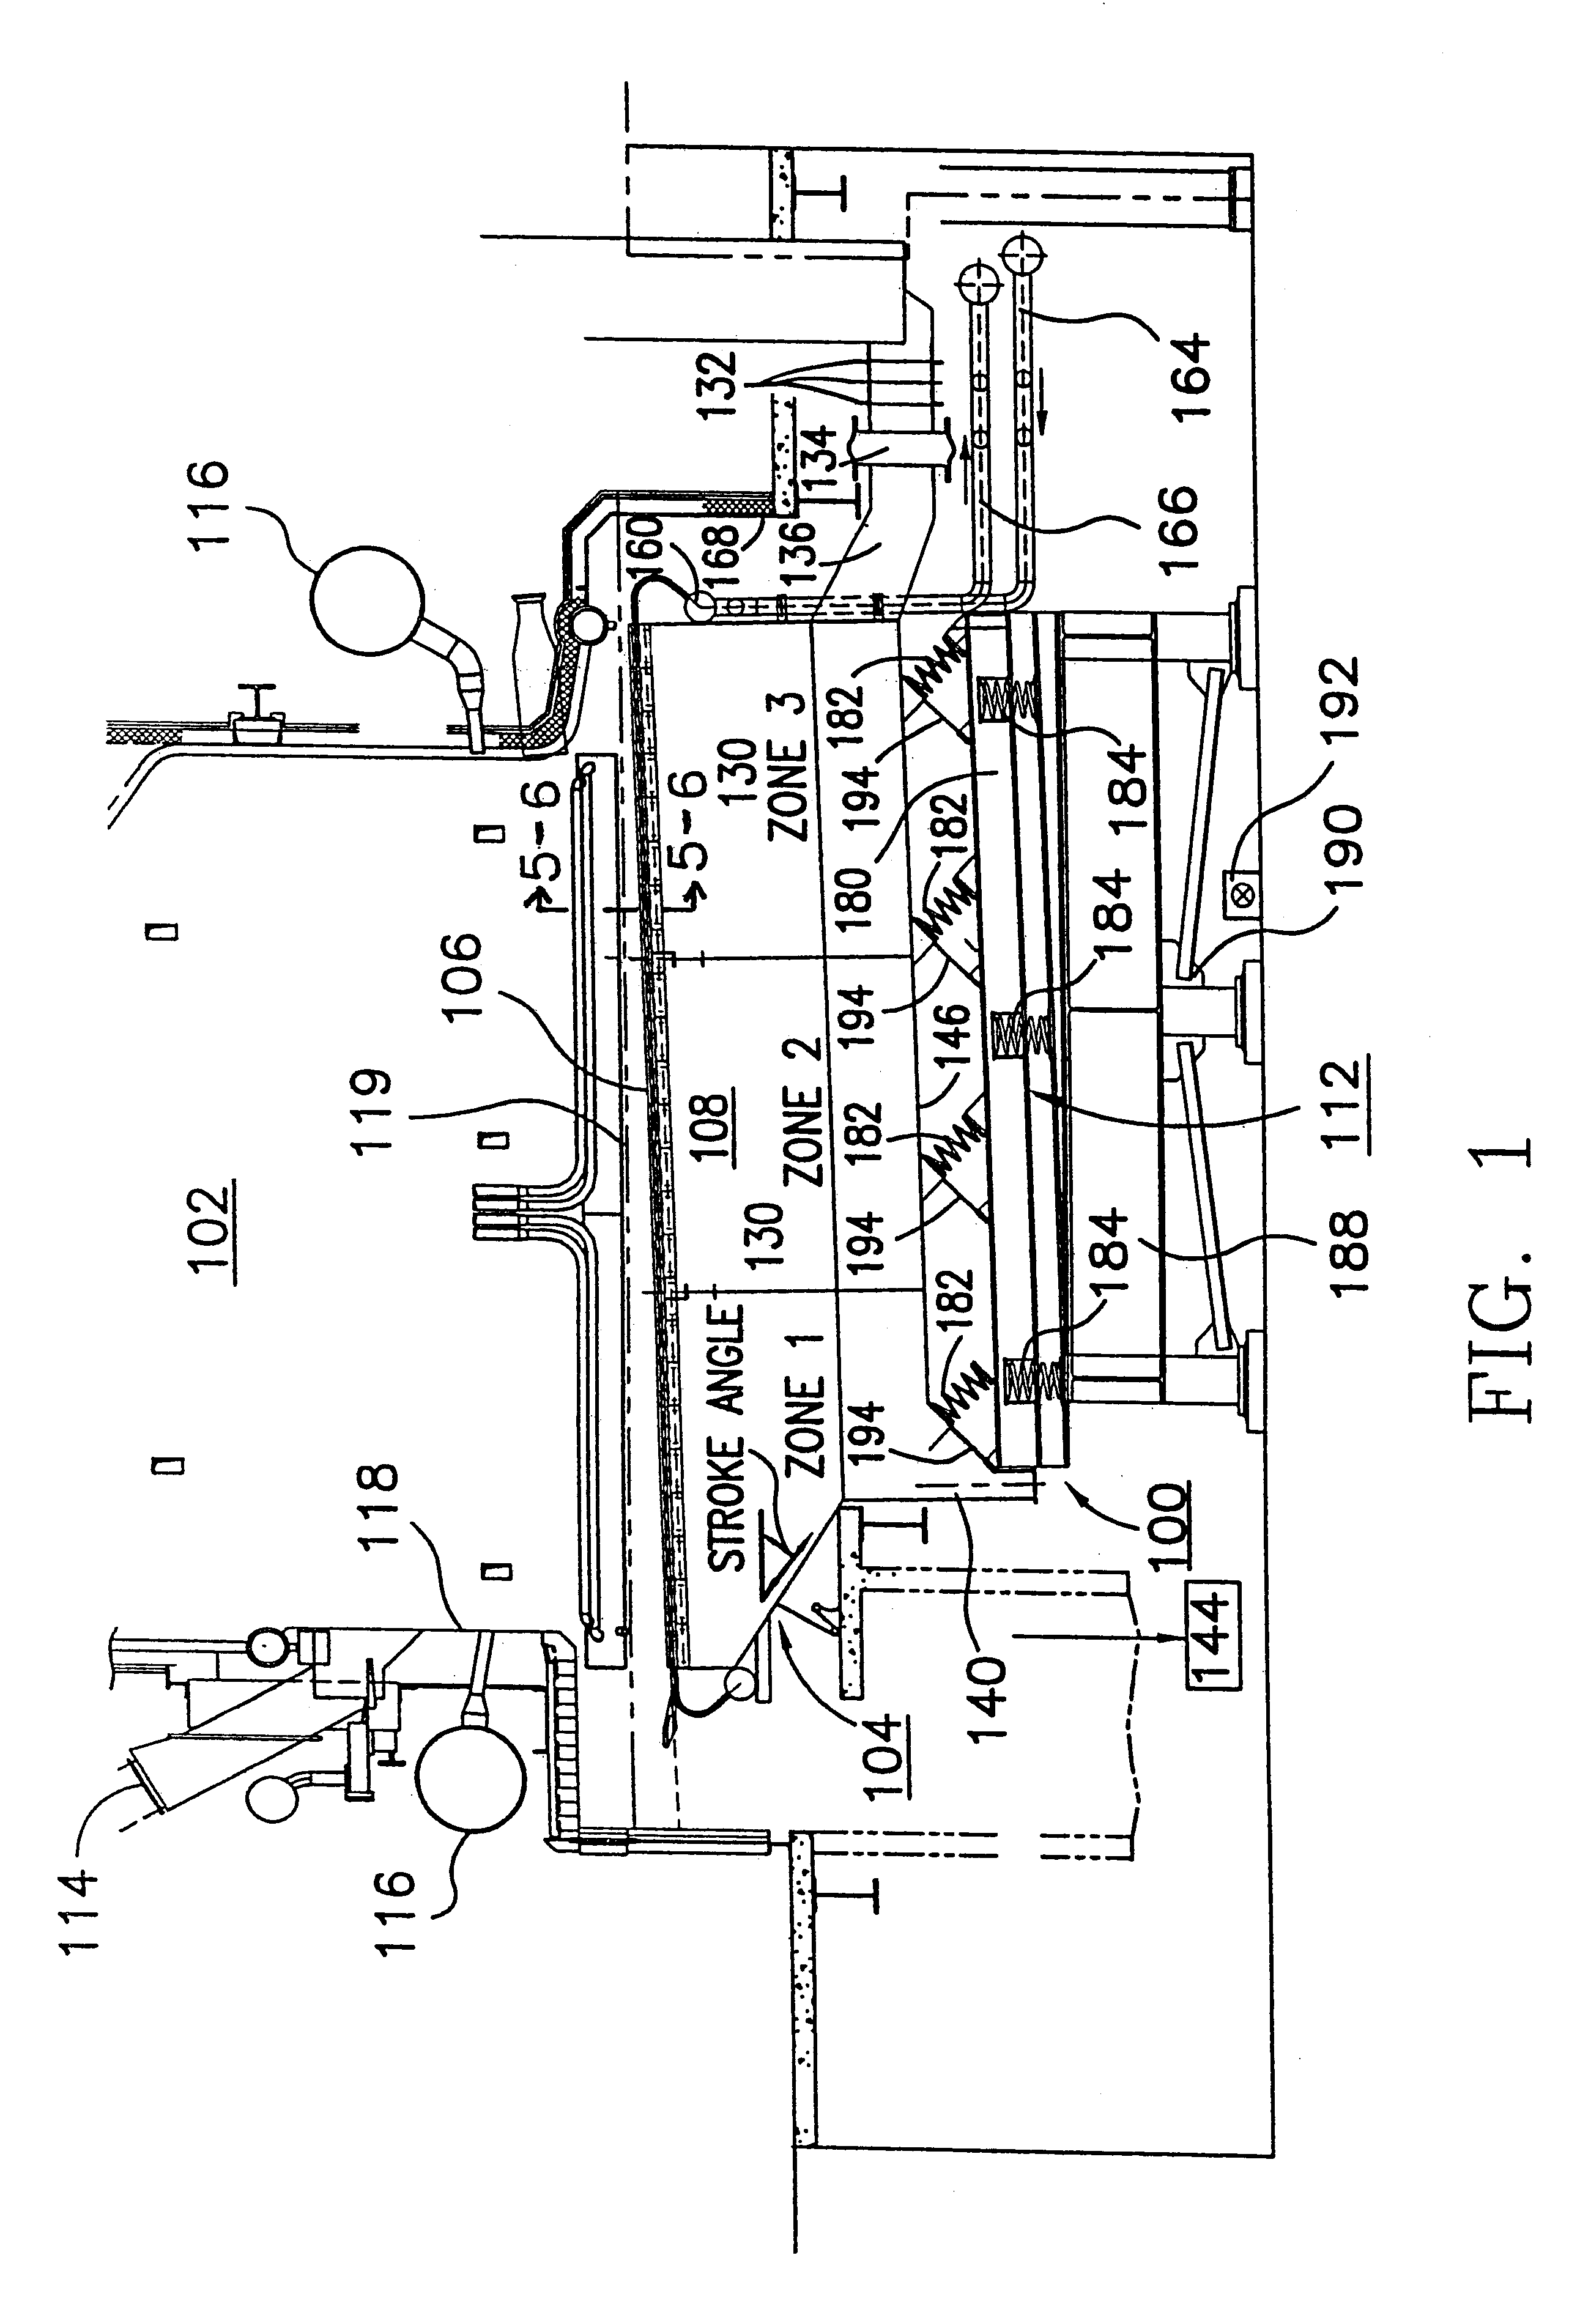 Water-cooled oscillating grate system